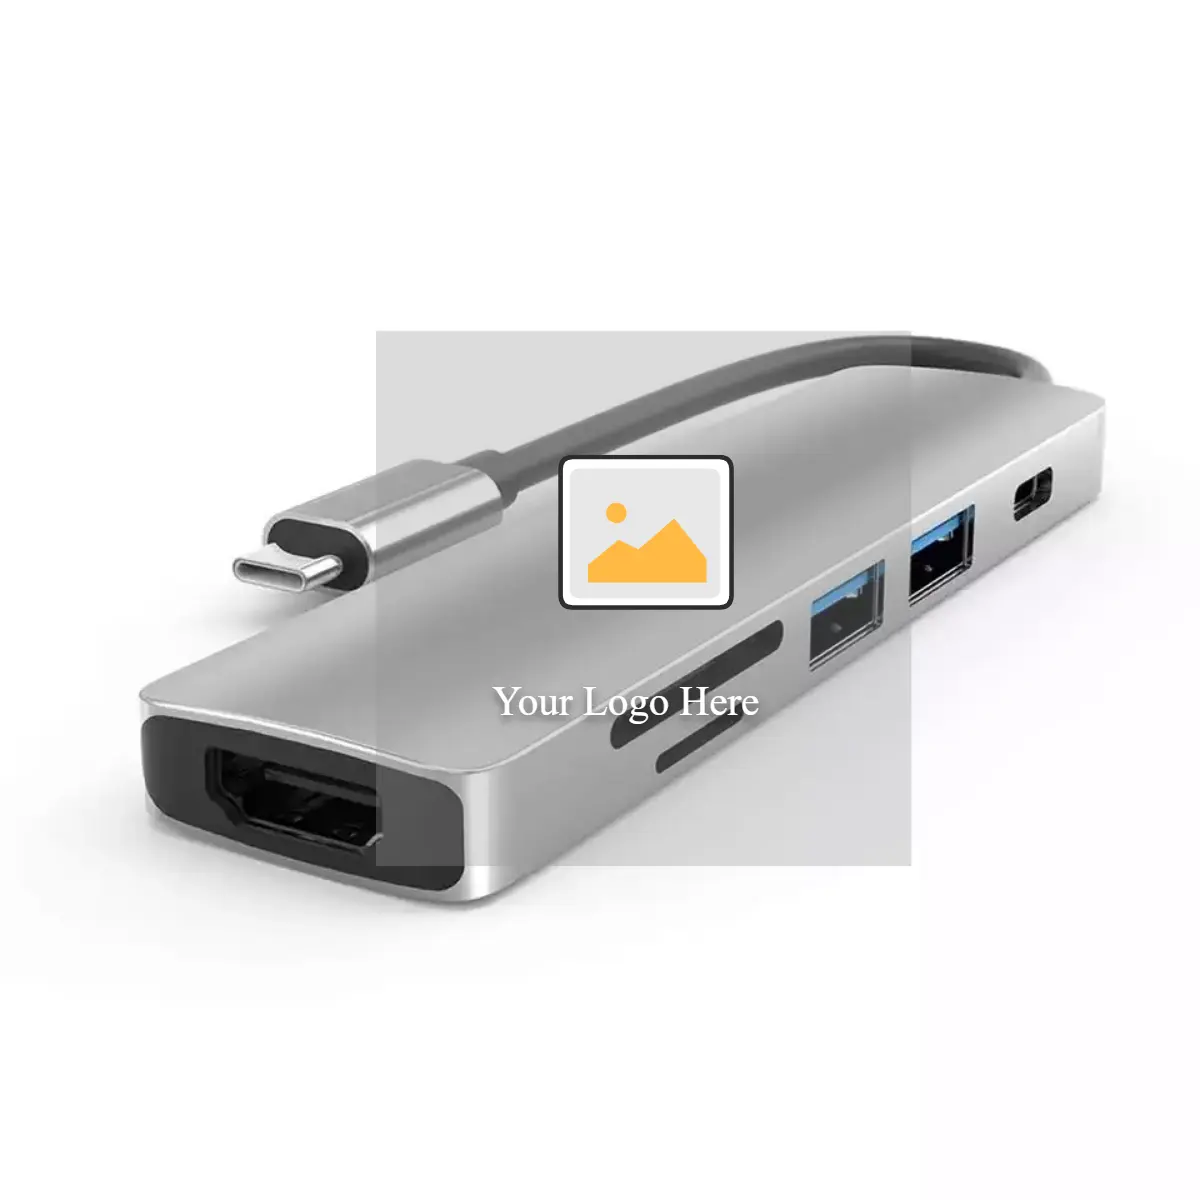 Pogo 6 in 1 USB Type C Hub Adapter with 4K HDTV Multiport Card Reader USB3.0 TF PD SD Reader For PC Computer Accessories